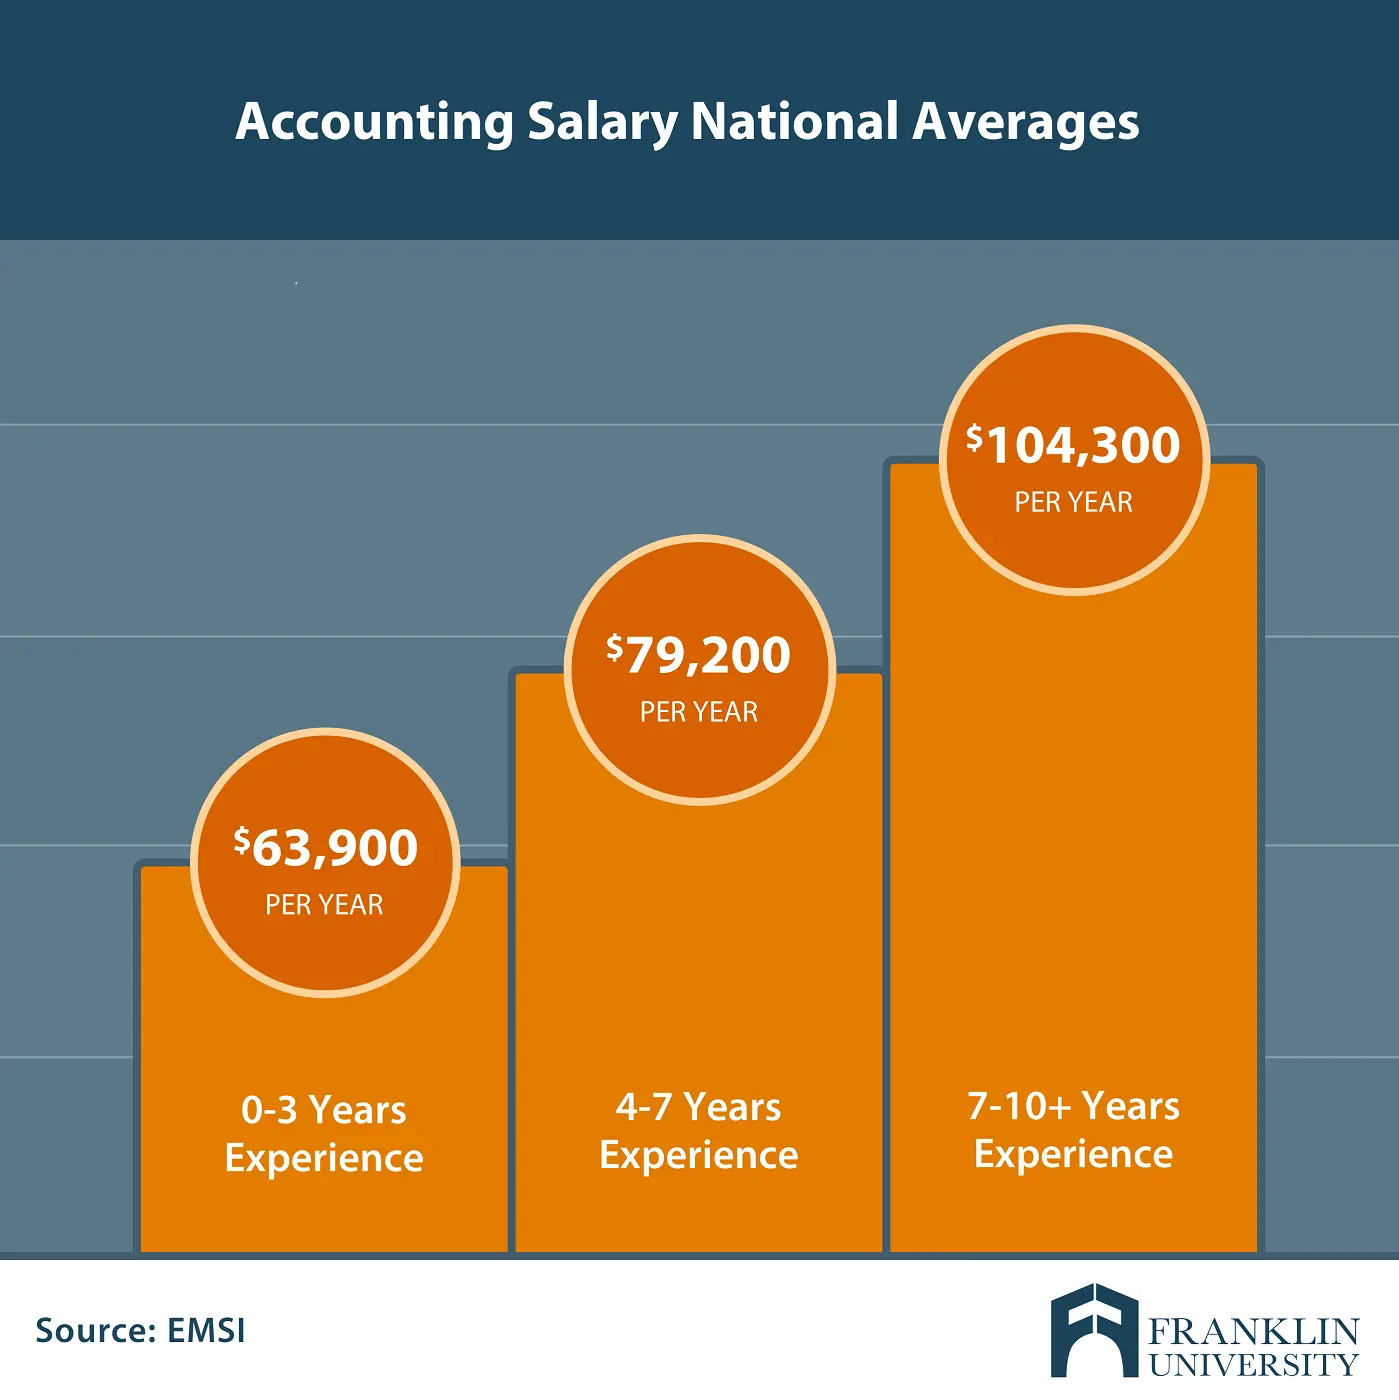 auditor salary nyc - How much do Big 4 auditors make in NYC